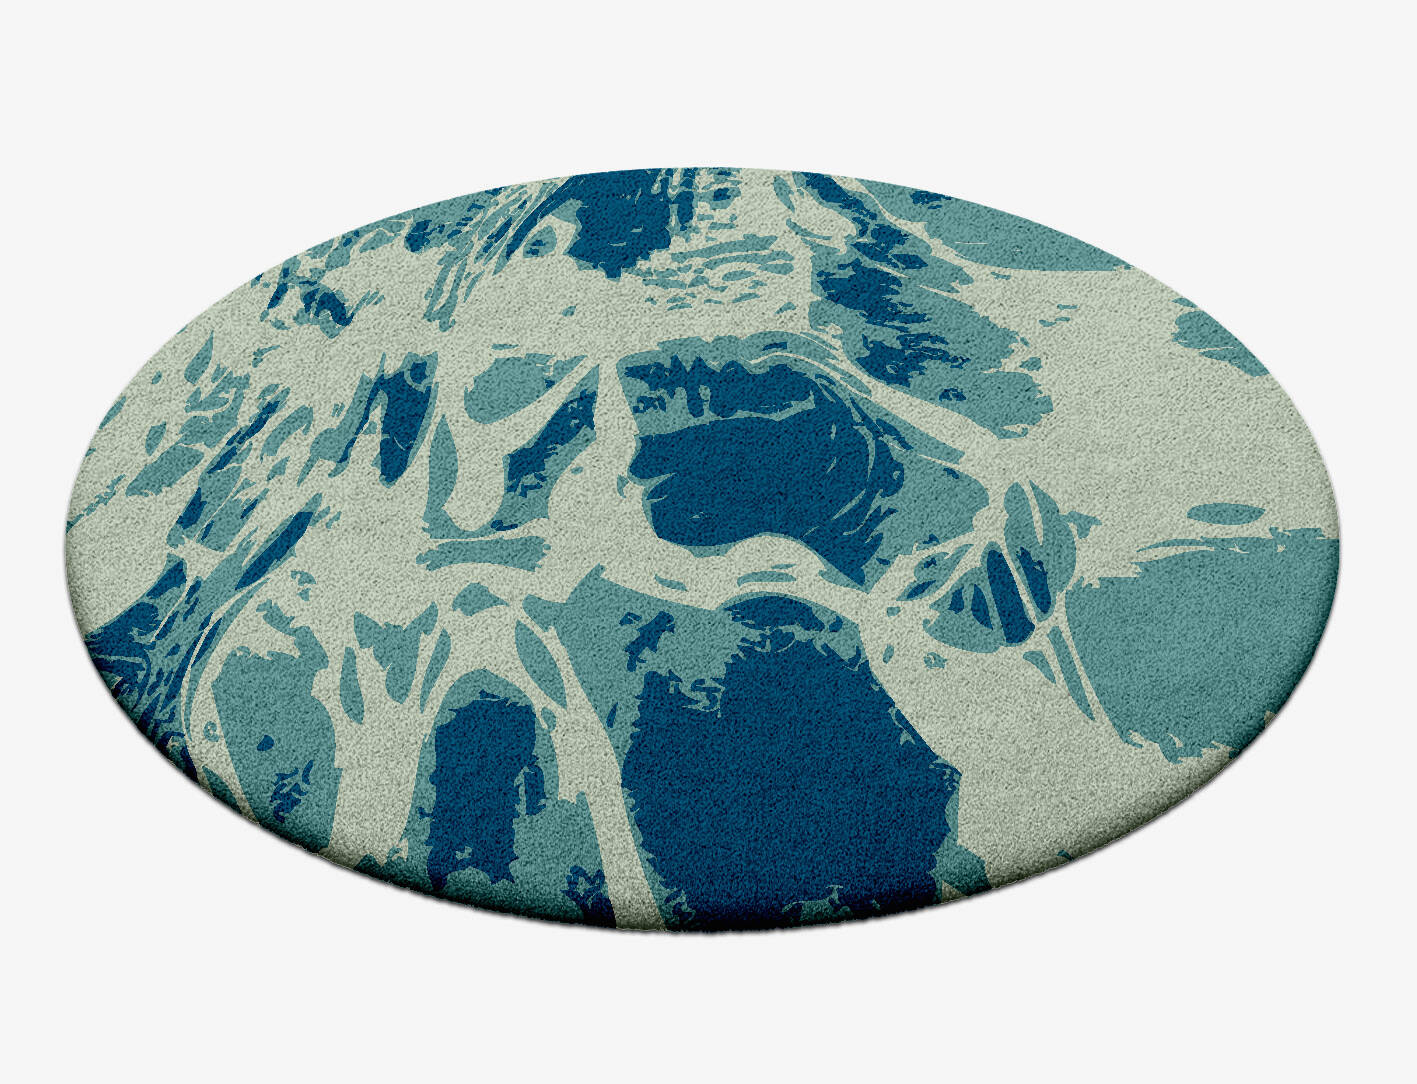 Seven Seas Abstract Round Hand Tufted Pure Wool Custom Rug by Rug Artisan